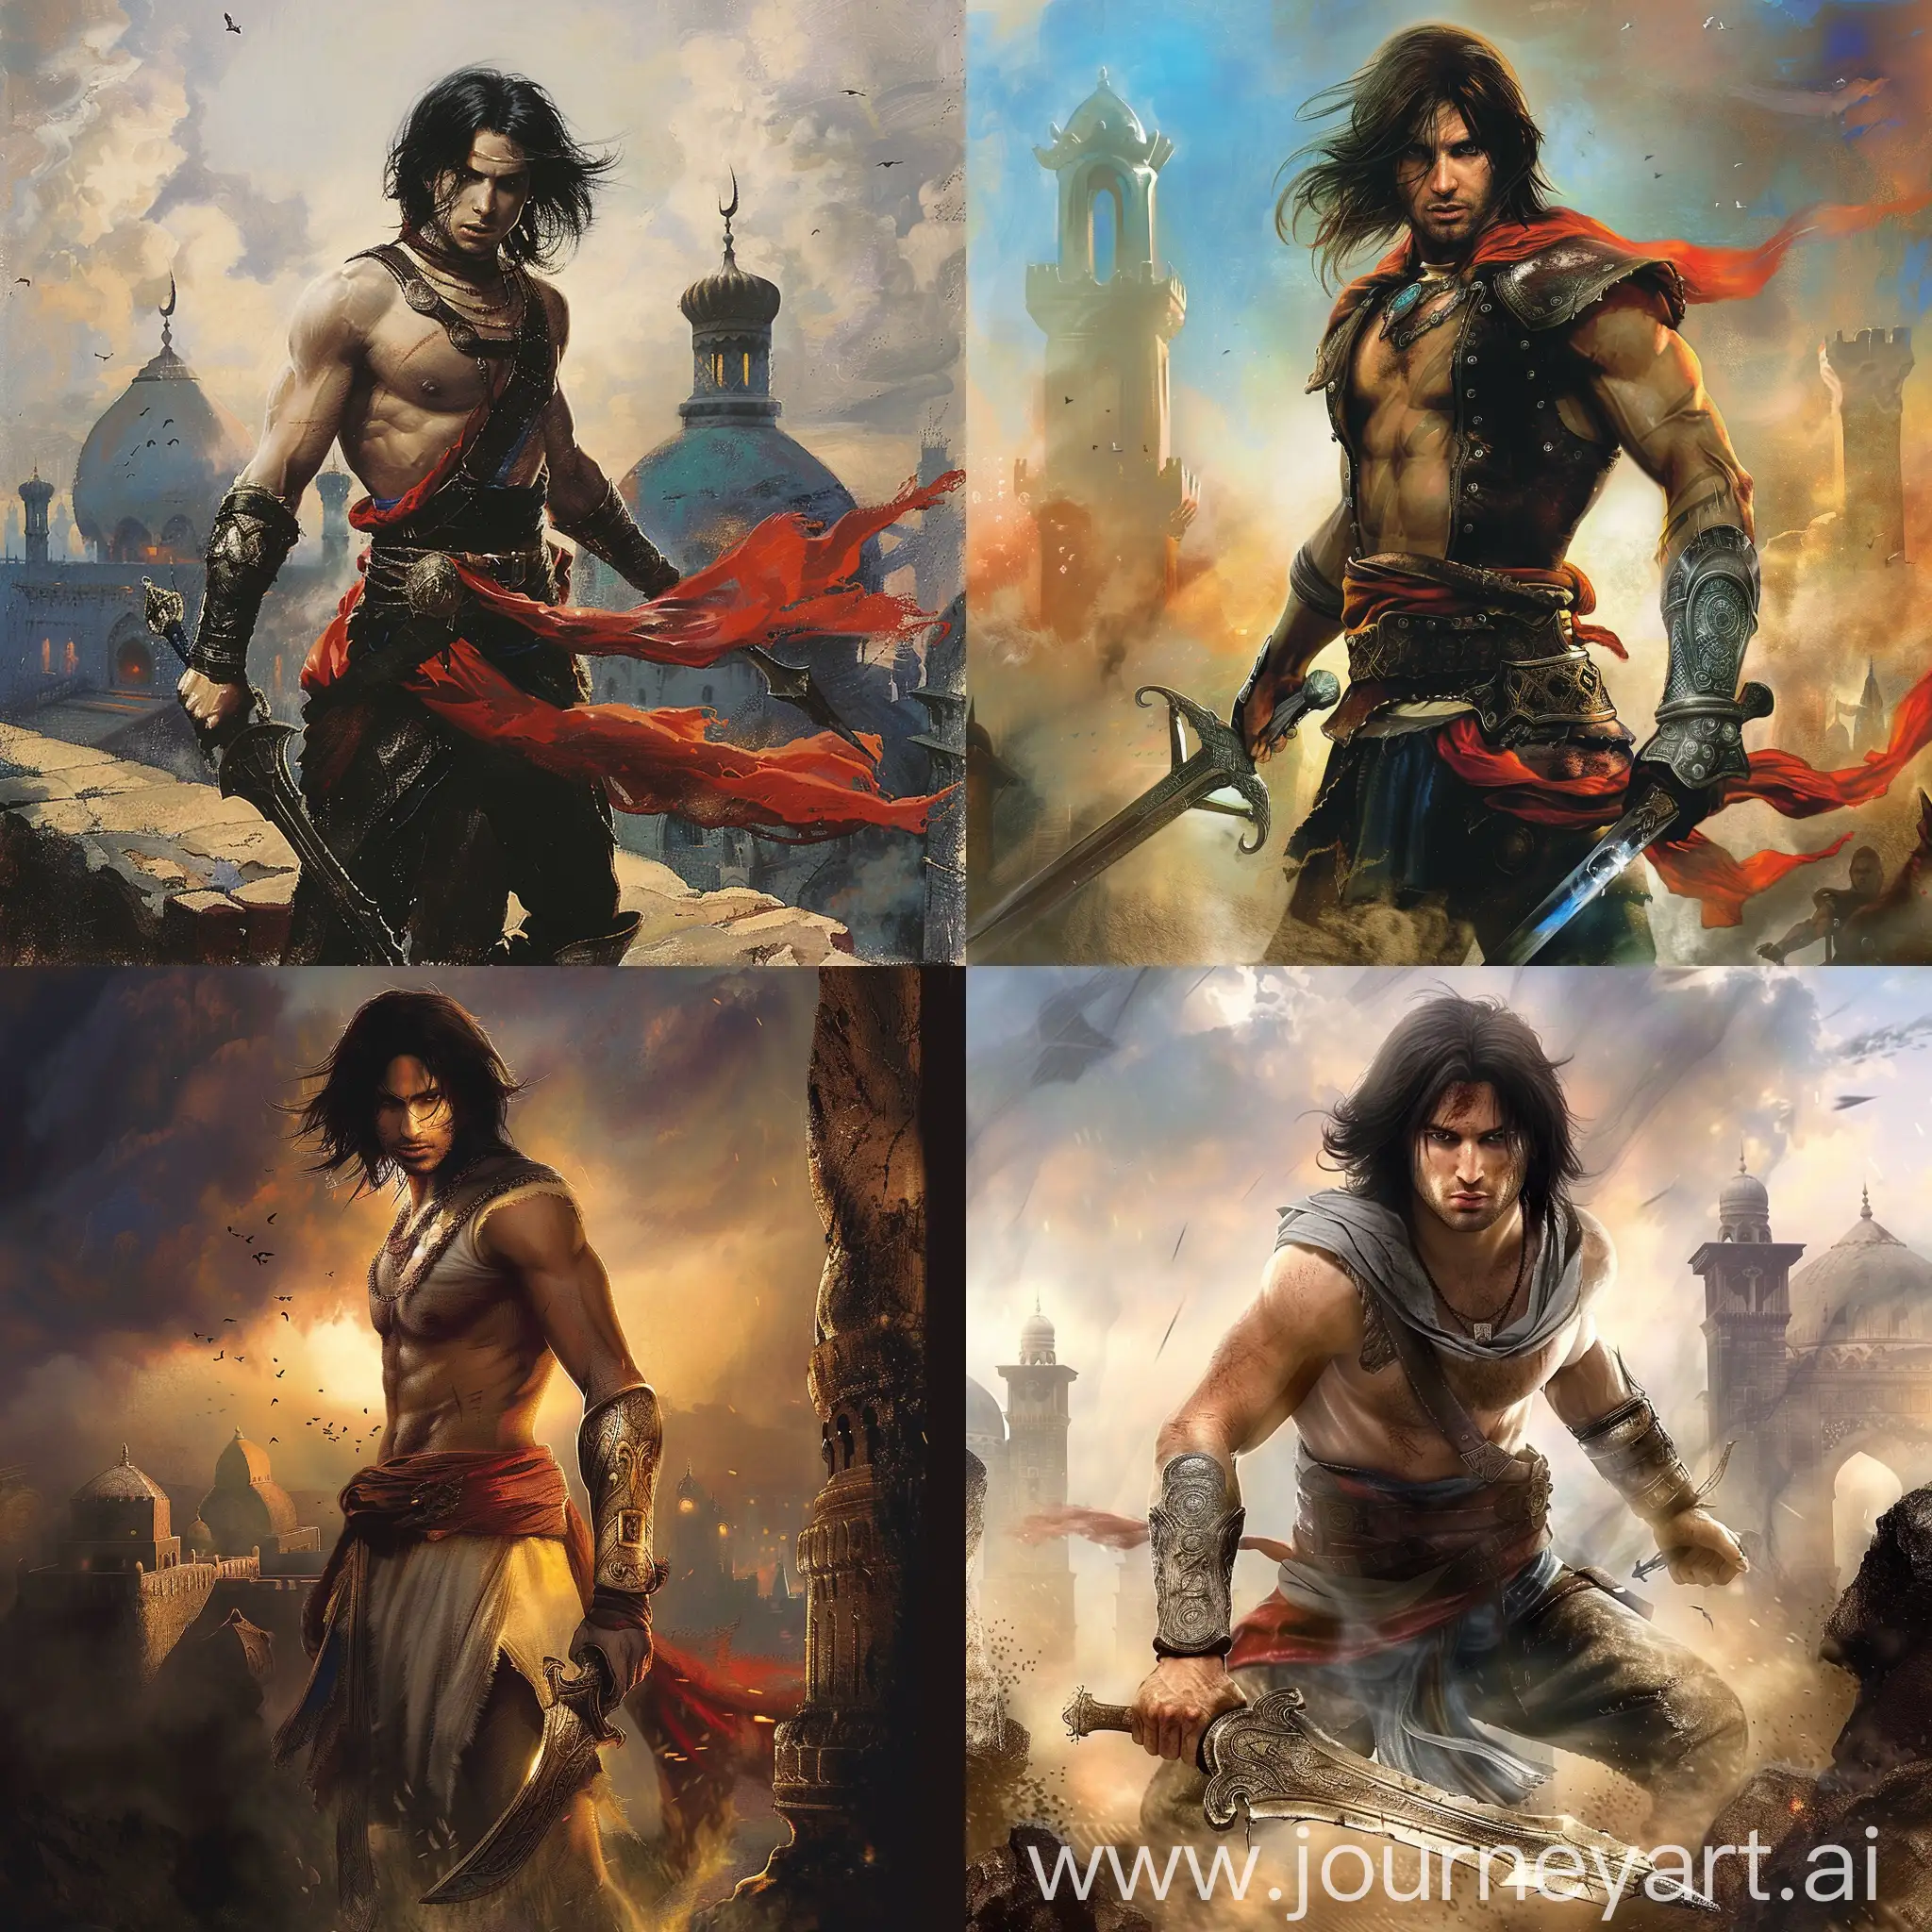 Royal-Prince-of-Persia-in-Ornate-Robes